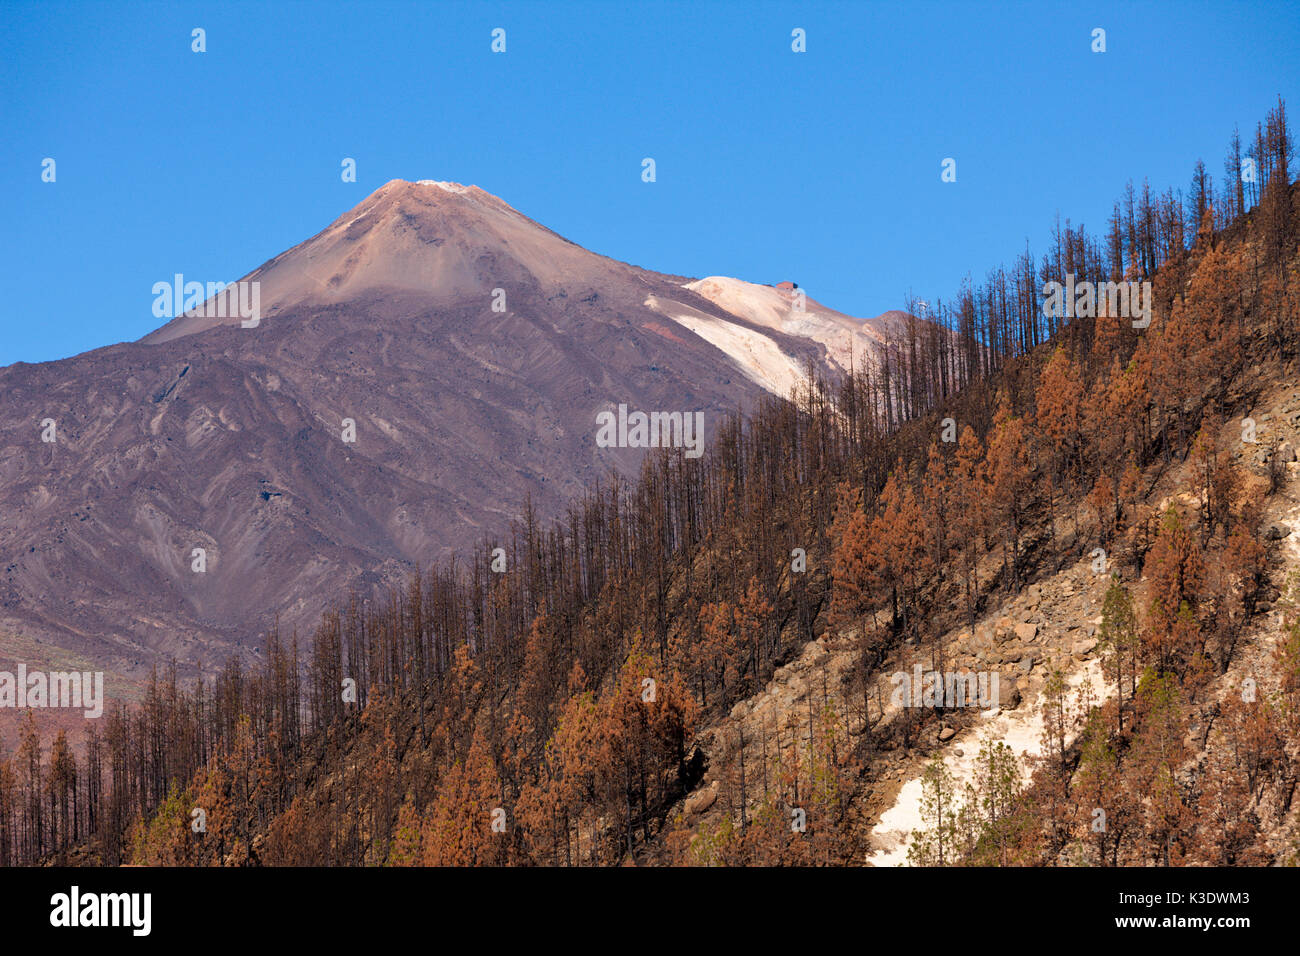 View at the Teide volcano, Tenerife, the Canaries, Spain, Stock Photo